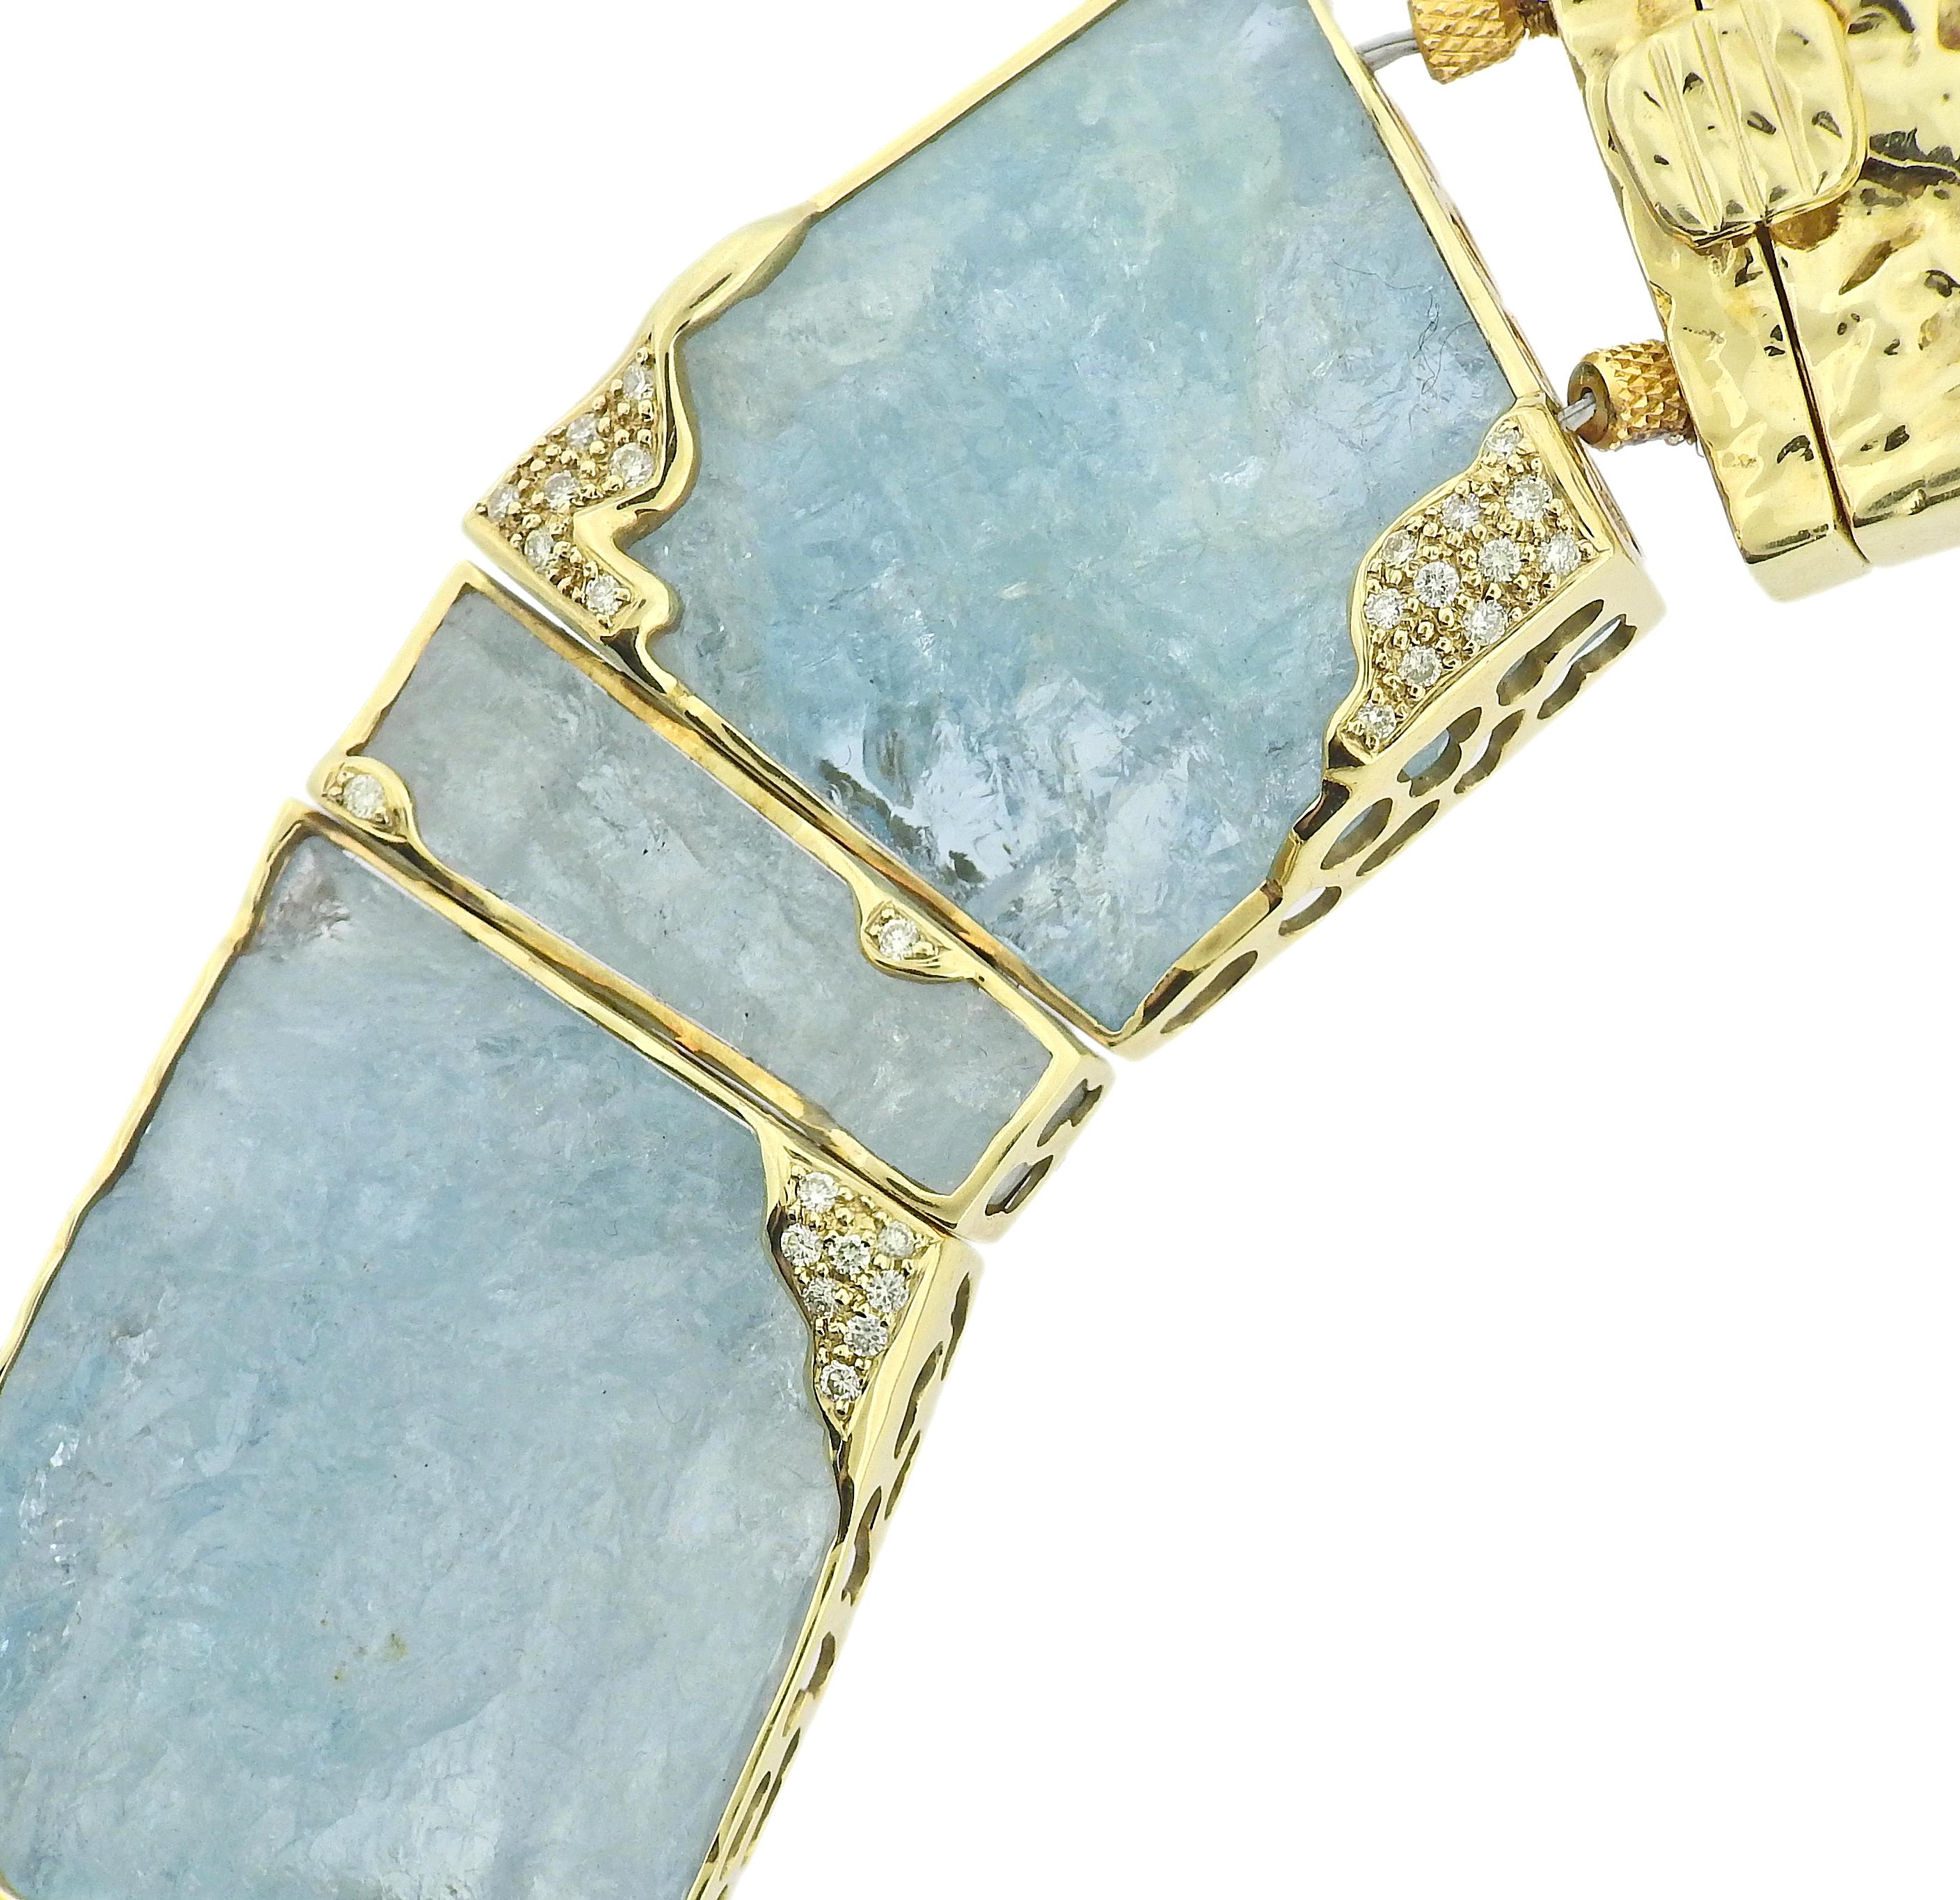 Winc Magnificent Natural Aquamarine Hammered Gold Diamond Necklace In Excellent Condition For Sale In Lambertville, NJ